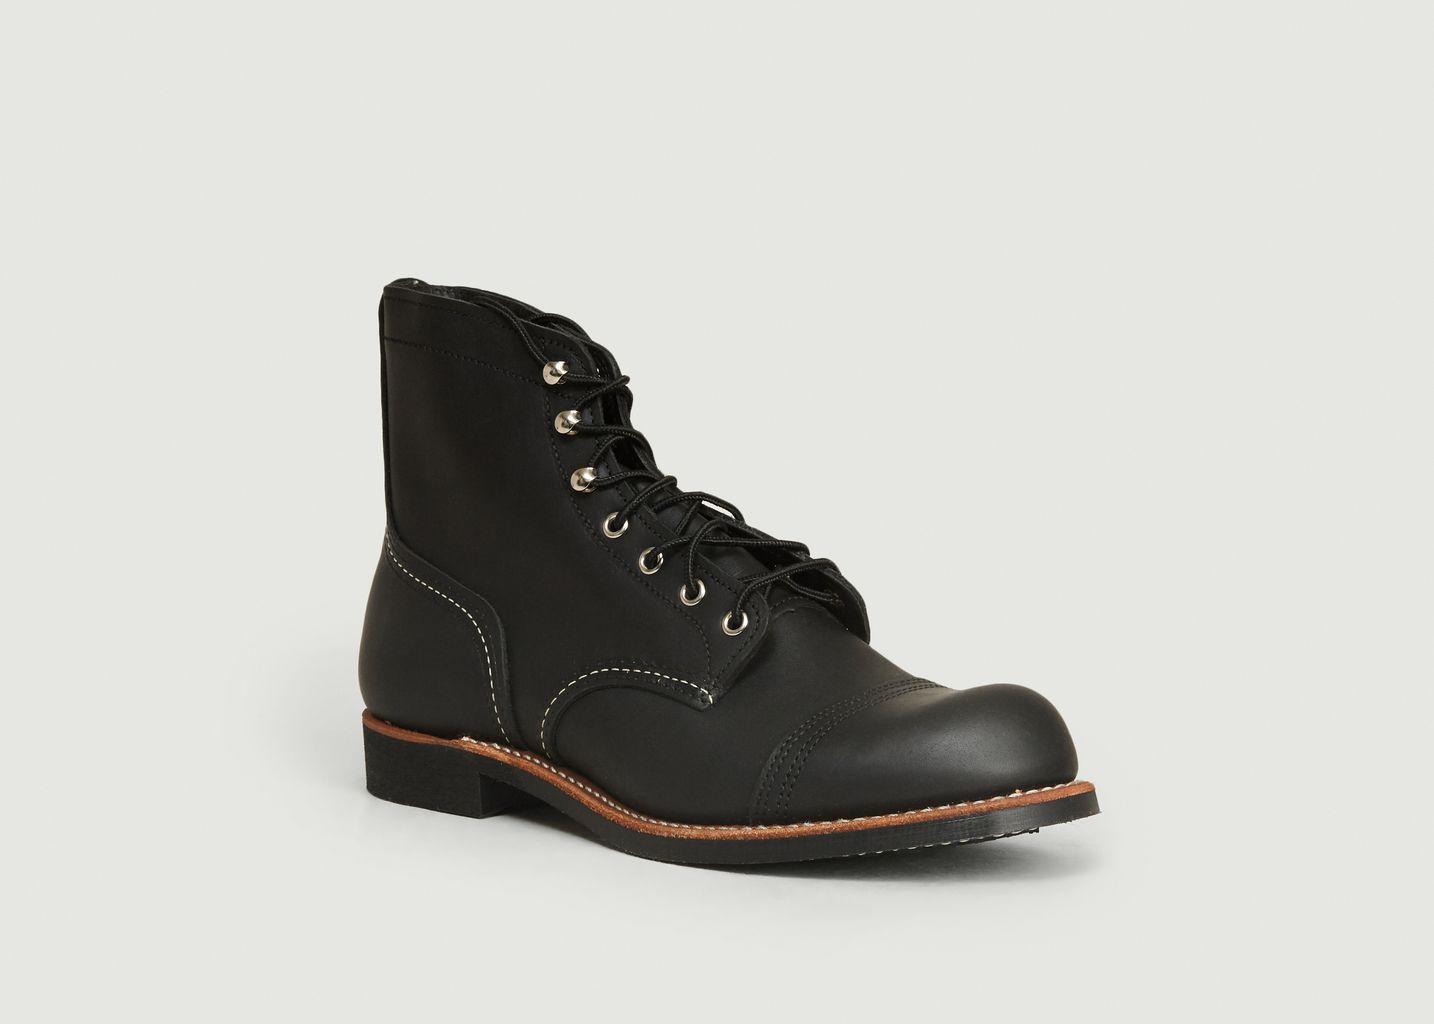 Iron Ranger Black Harness Boots - Red Wing Shoes